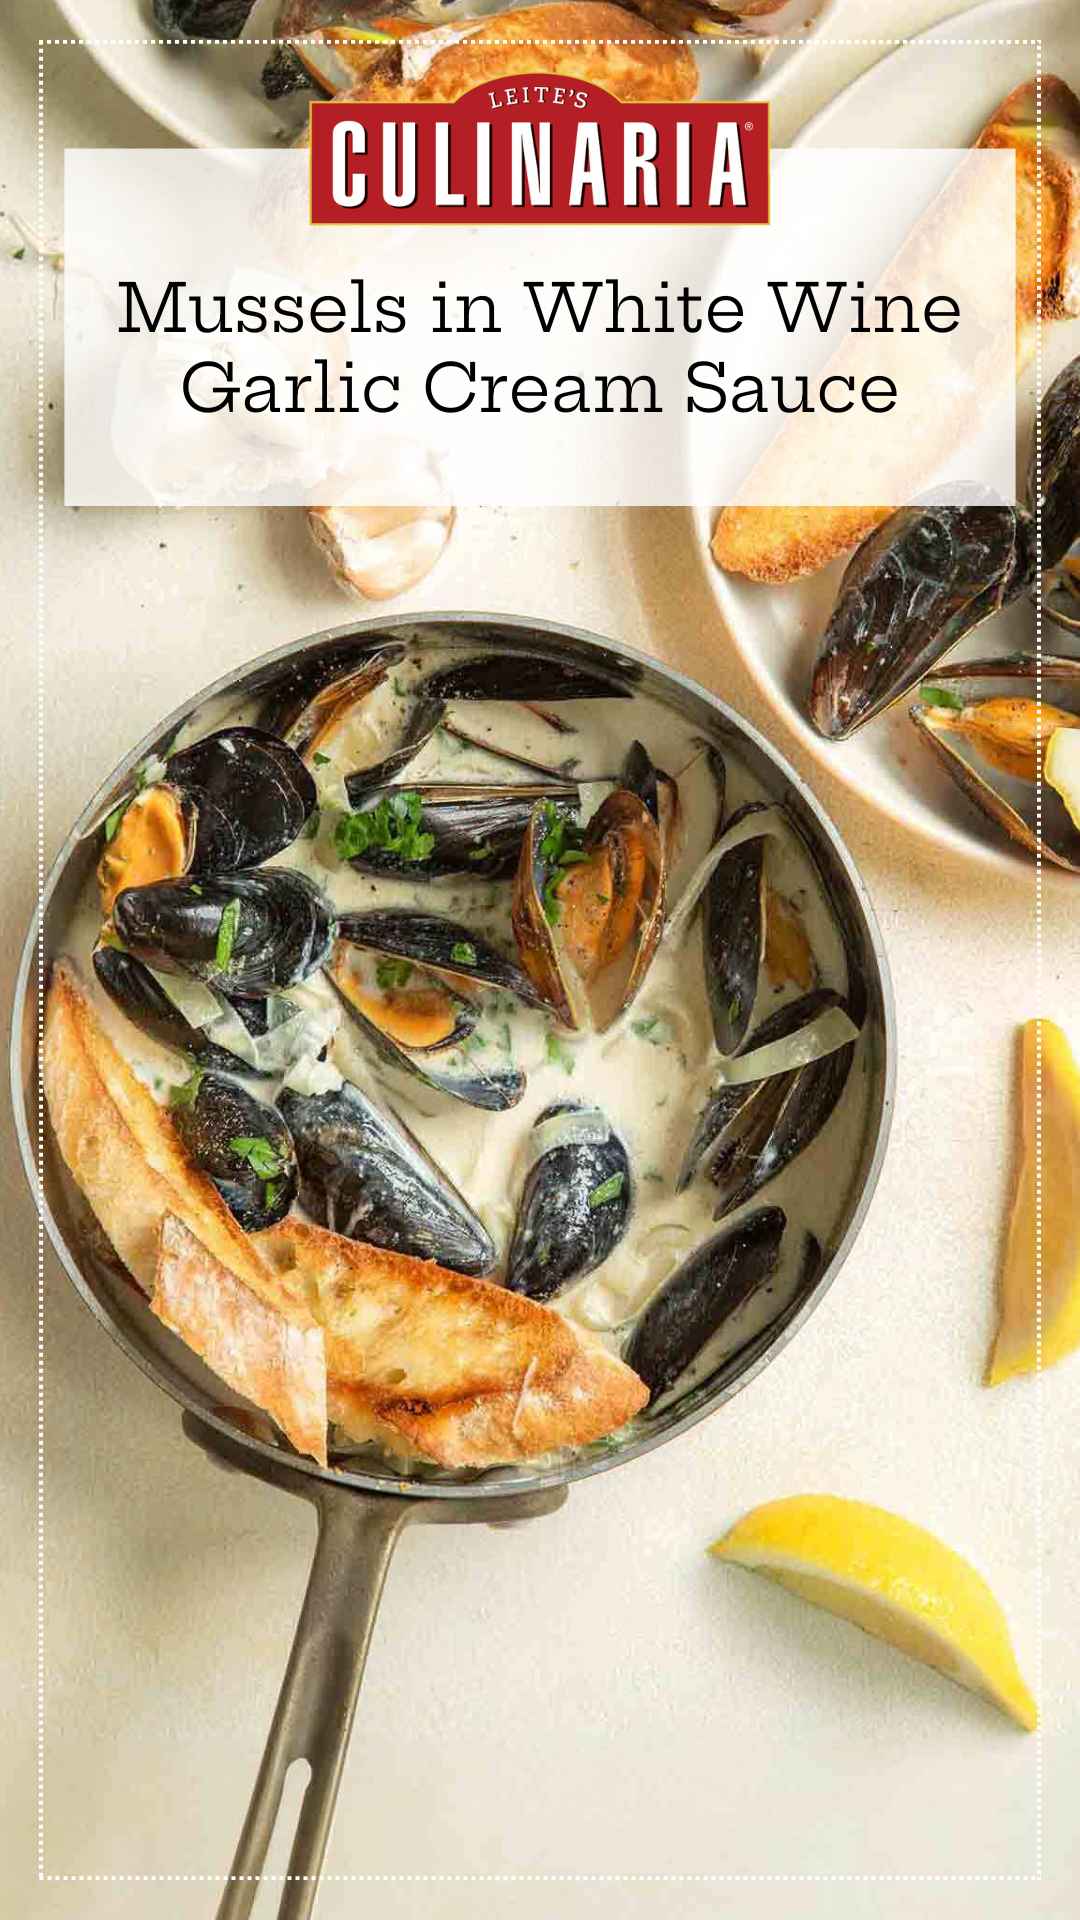 A skillet filled with steamed mussels in a creamy garlic white wine sauce with toasted bread and lemon wedges on the side.